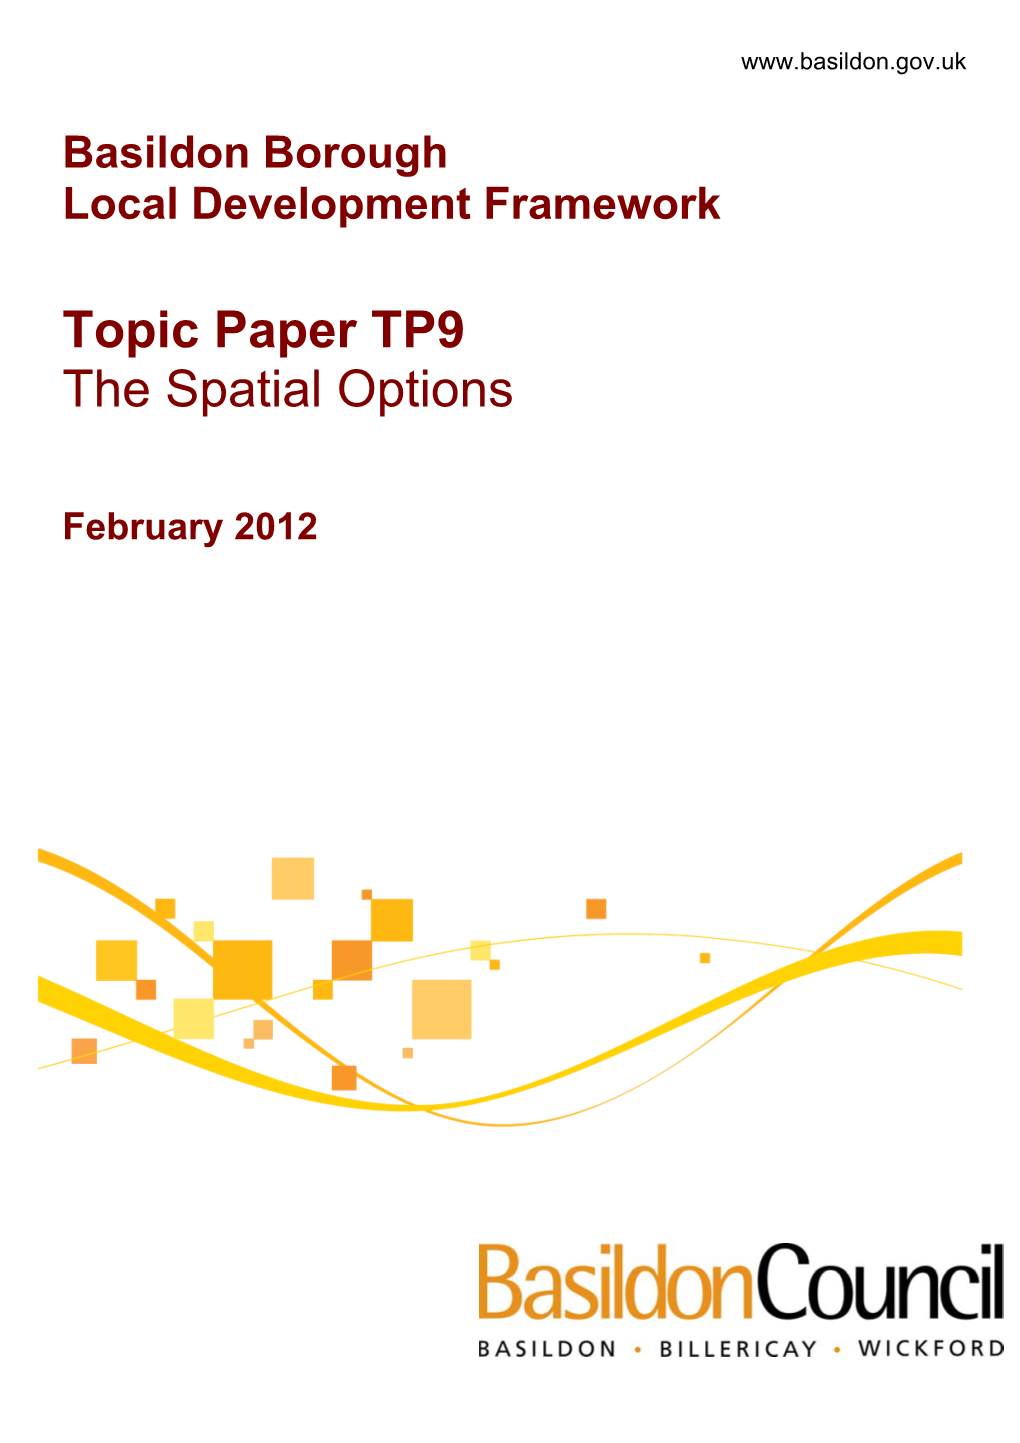 Topic Paper TP9 the Spatial Options